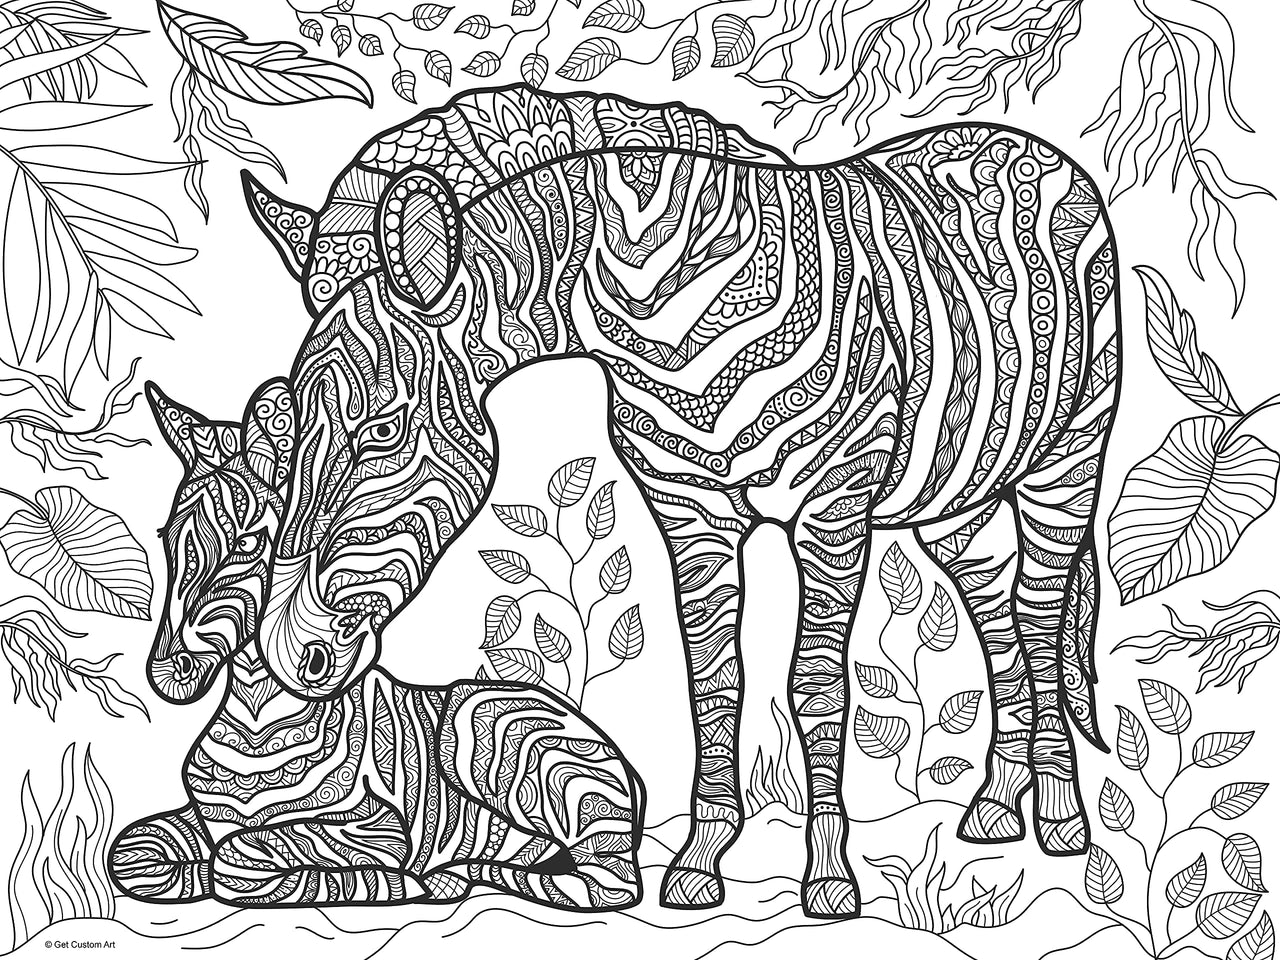 Large Zebra and Calf Coloring Poster – Animal Art for Kids and Adults | DIY Stress Relief Coloring Poster